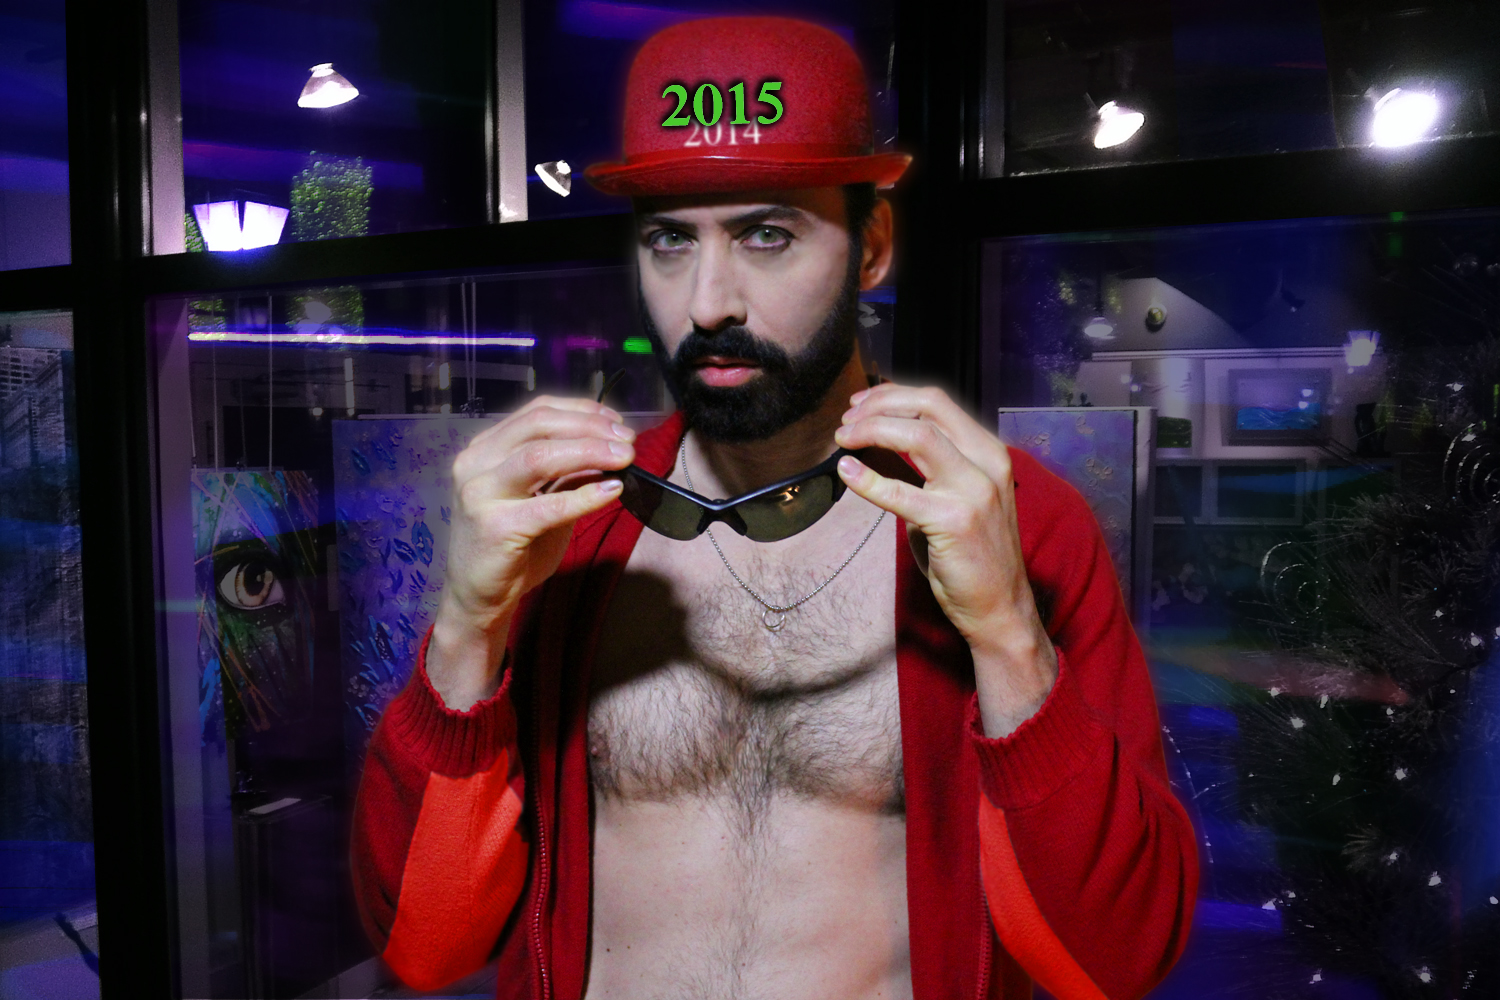 I want to wish you all a very #HappyNewYear2015 Je veux vous souhaiter à tous une très #BonneAnnée2015. Feliz Año Nuevo 2015. #AllTheBest #Health #Love #Happiness #MoonDazeTV #RealityShow #NewSeason #Beard #LifeIsGood